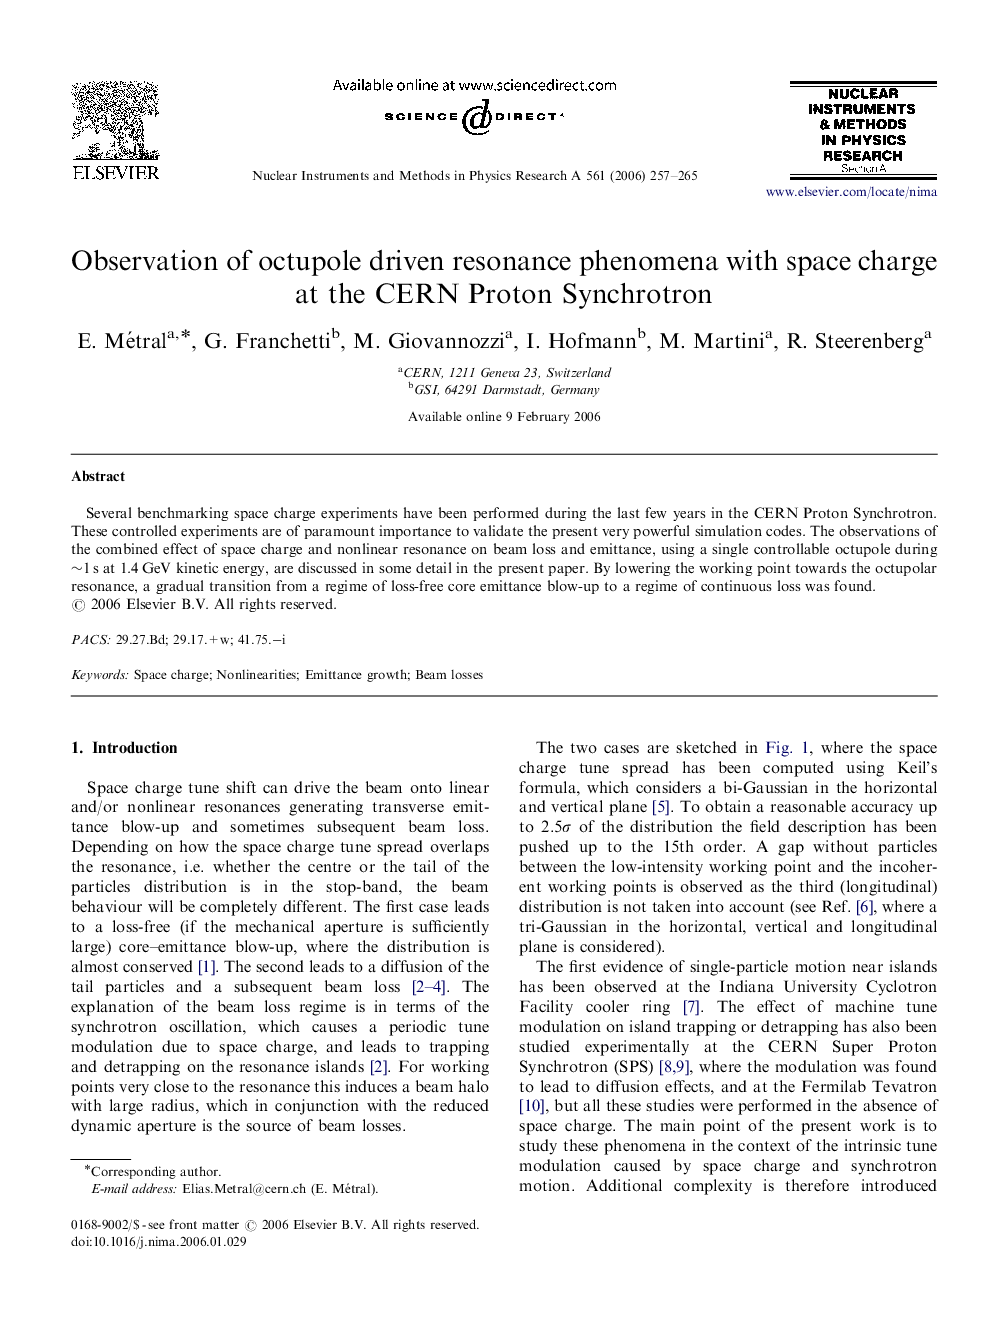 Observation of octupole driven resonance phenomena with space charge at the CERN Proton Synchrotron